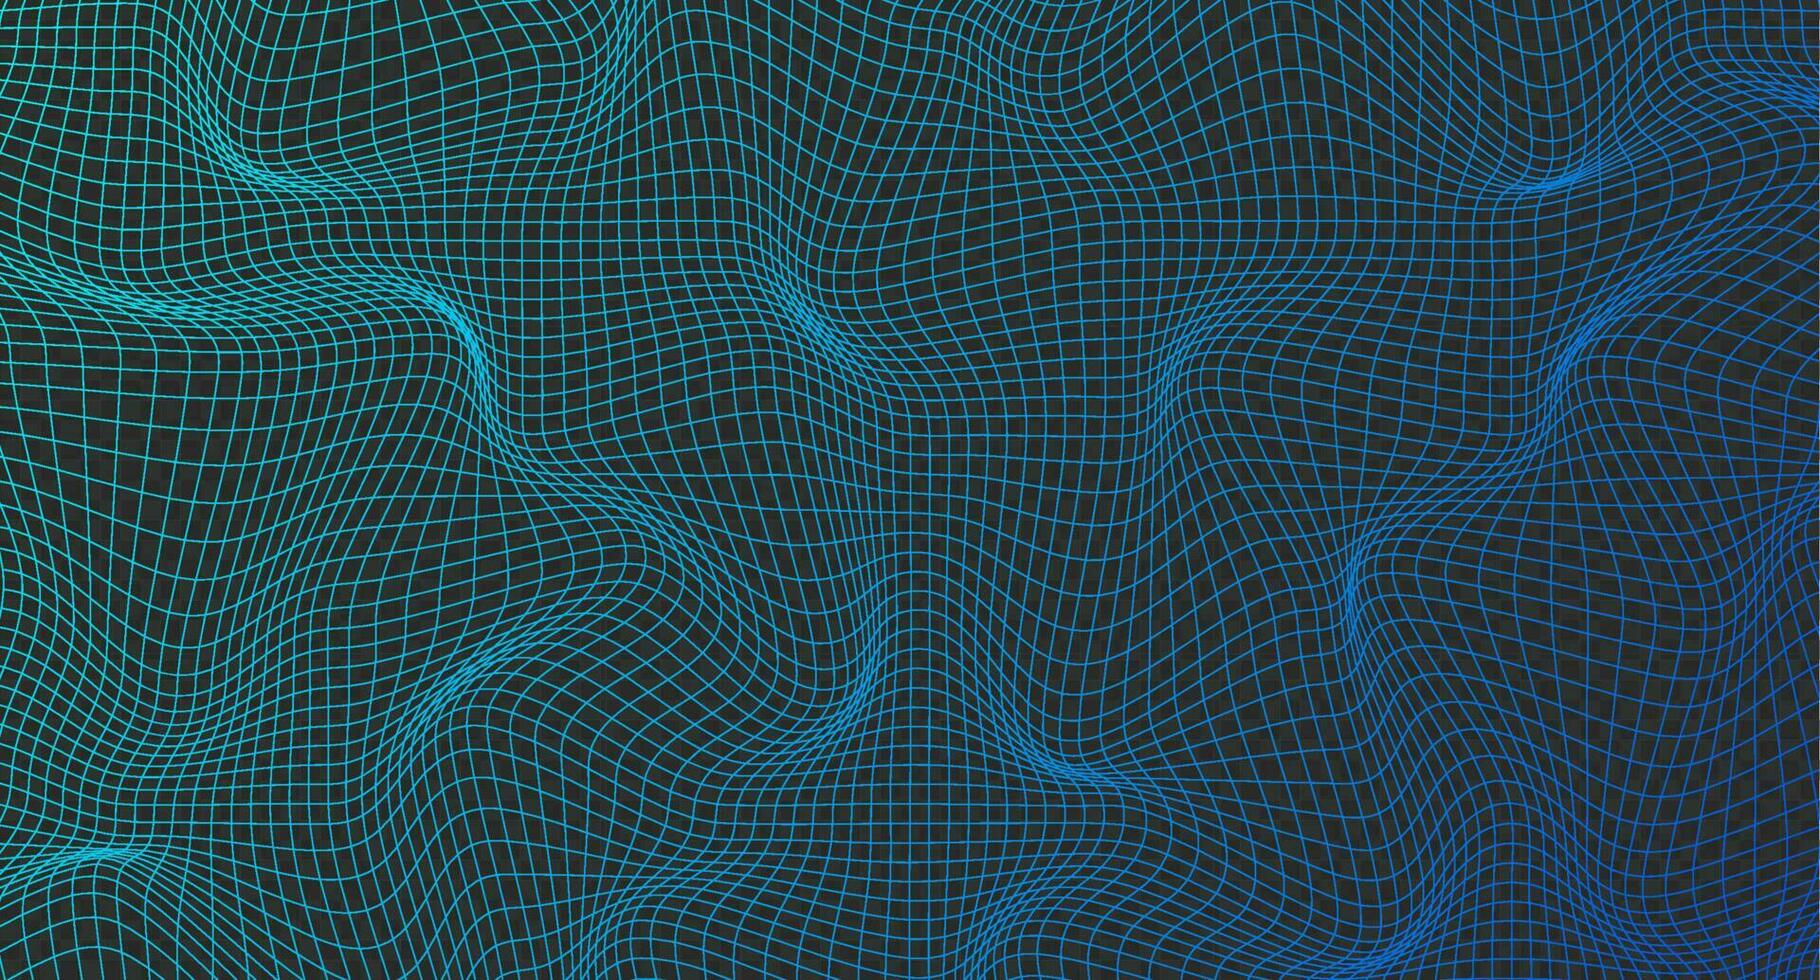 Abstract wavy 3d mesh. Geometric dynamic wave. Distorted square grid. Warped mesh texture. Wireframe wave geometry grid. Vector illustration